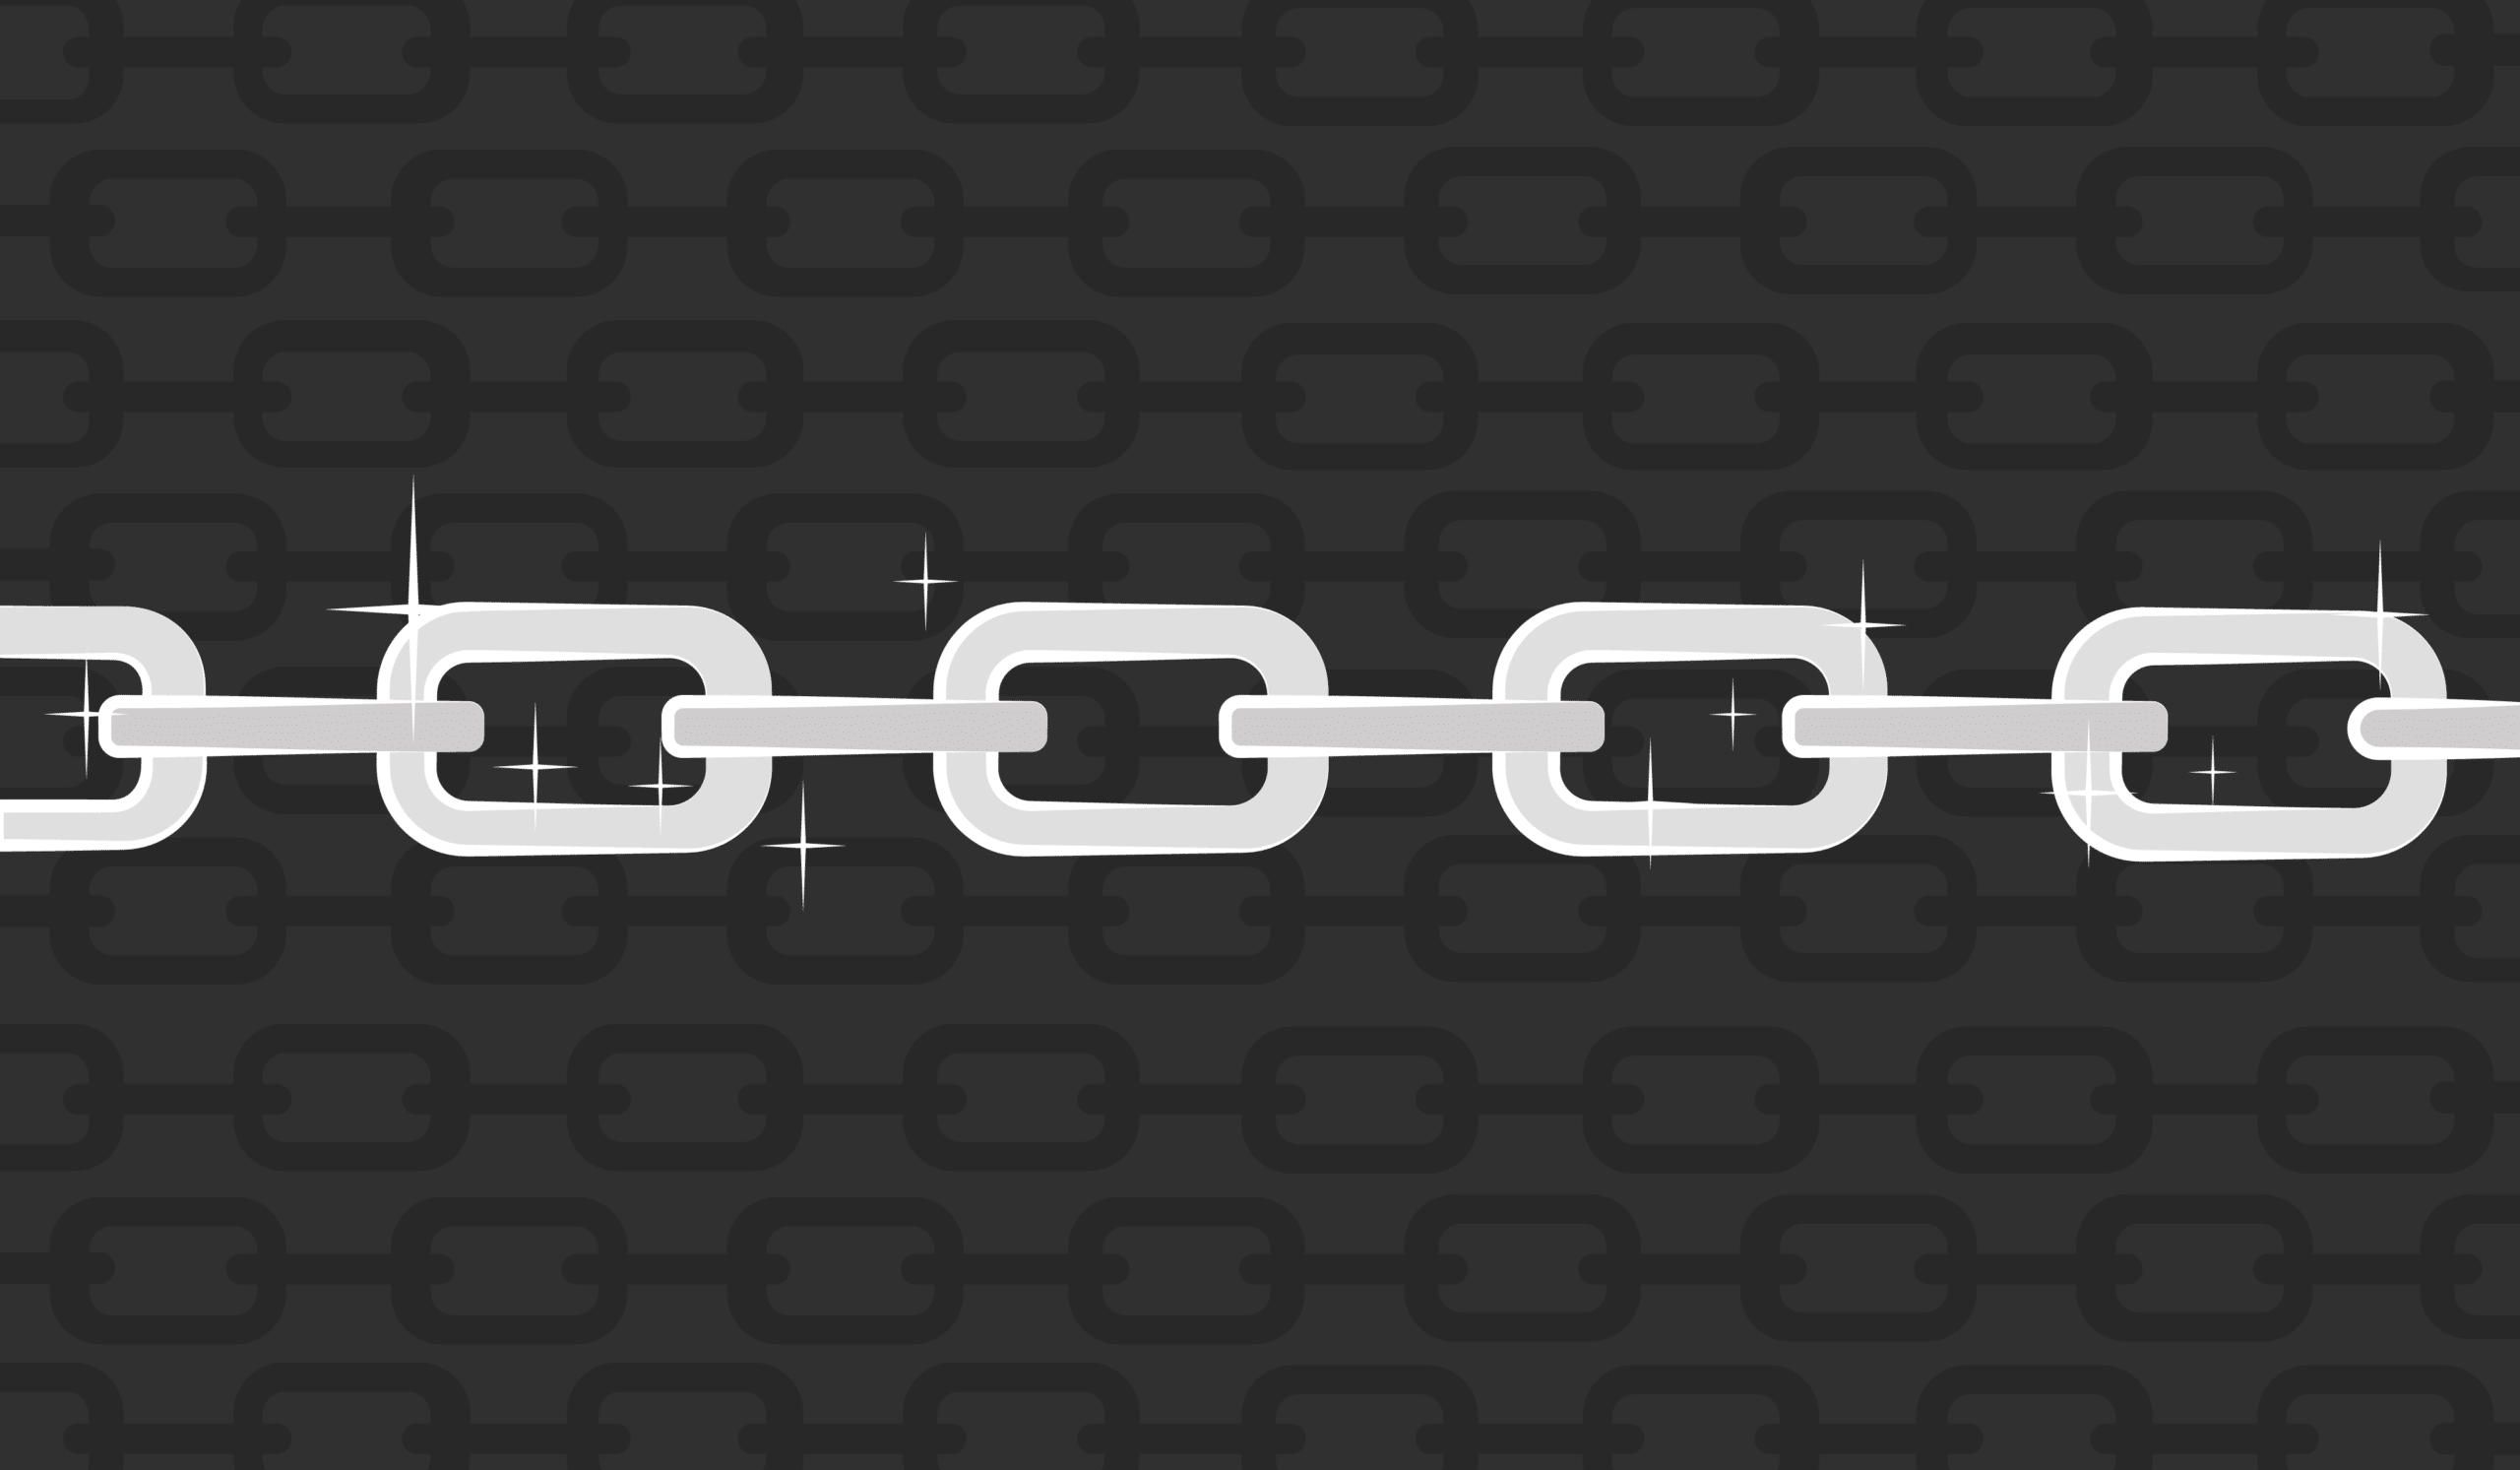 Illustration of a chain of links.